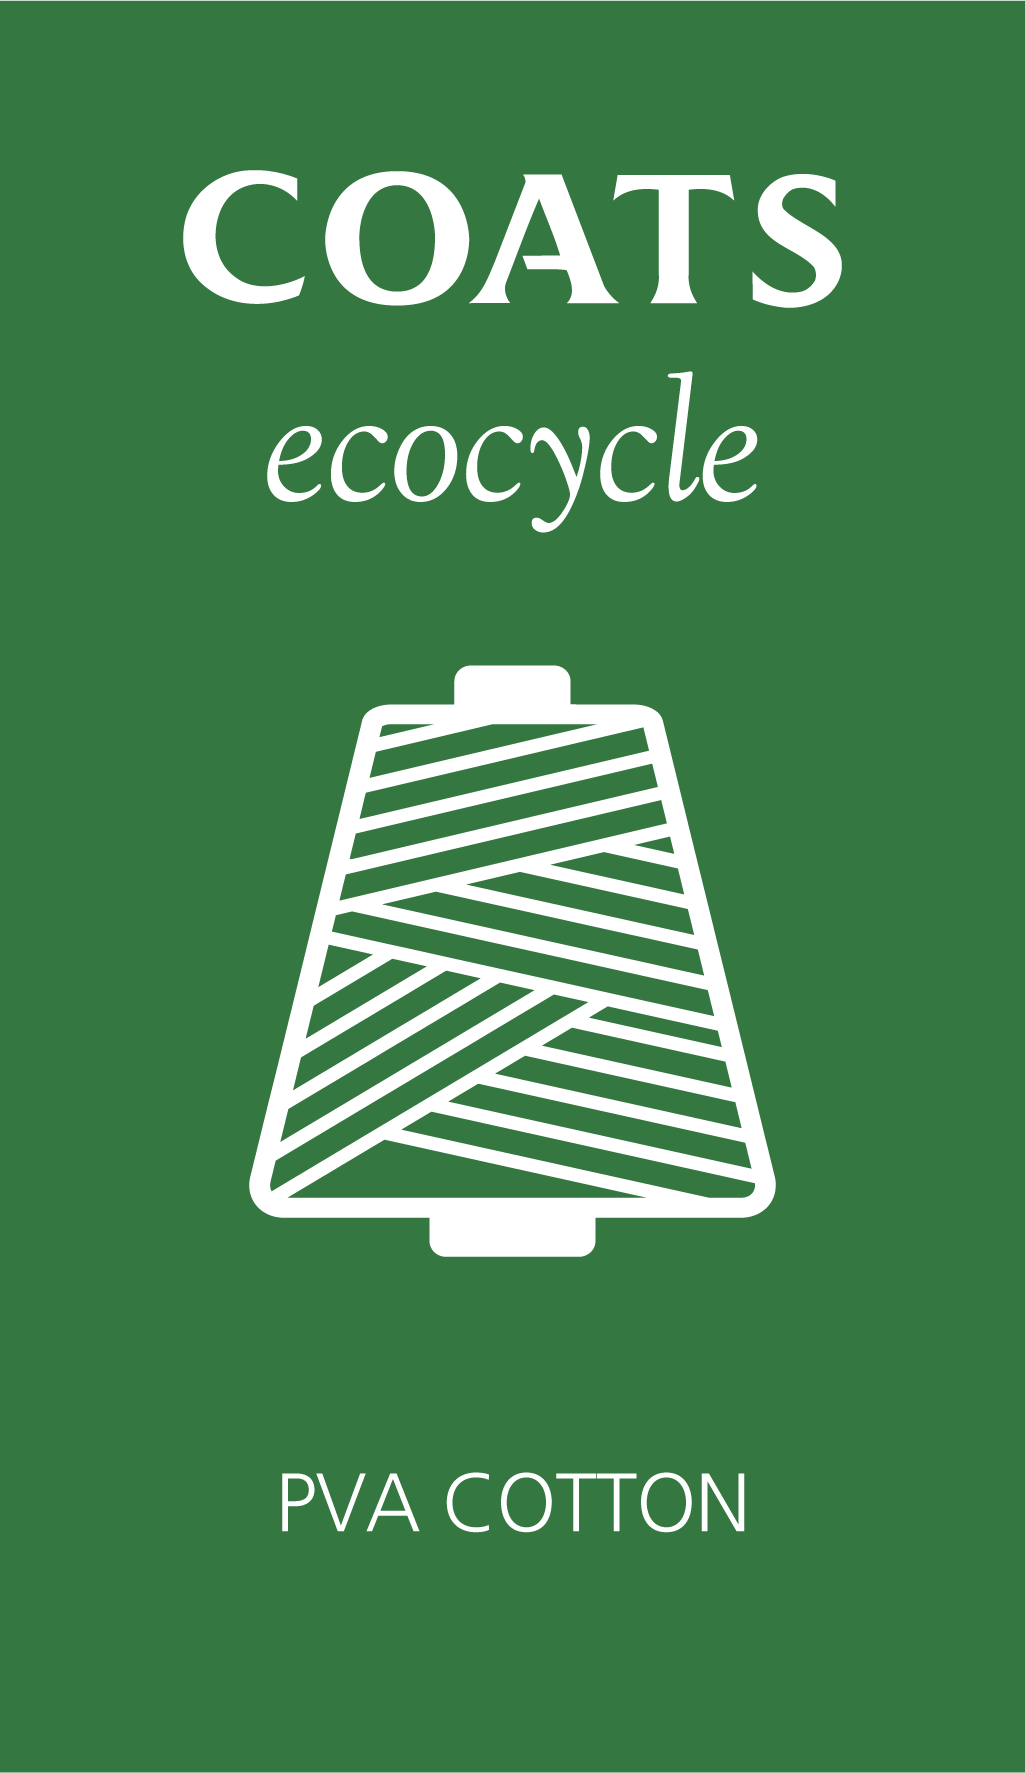 Coats ecocycle Tkt 60, 2500m, separate different raw materials at end of life